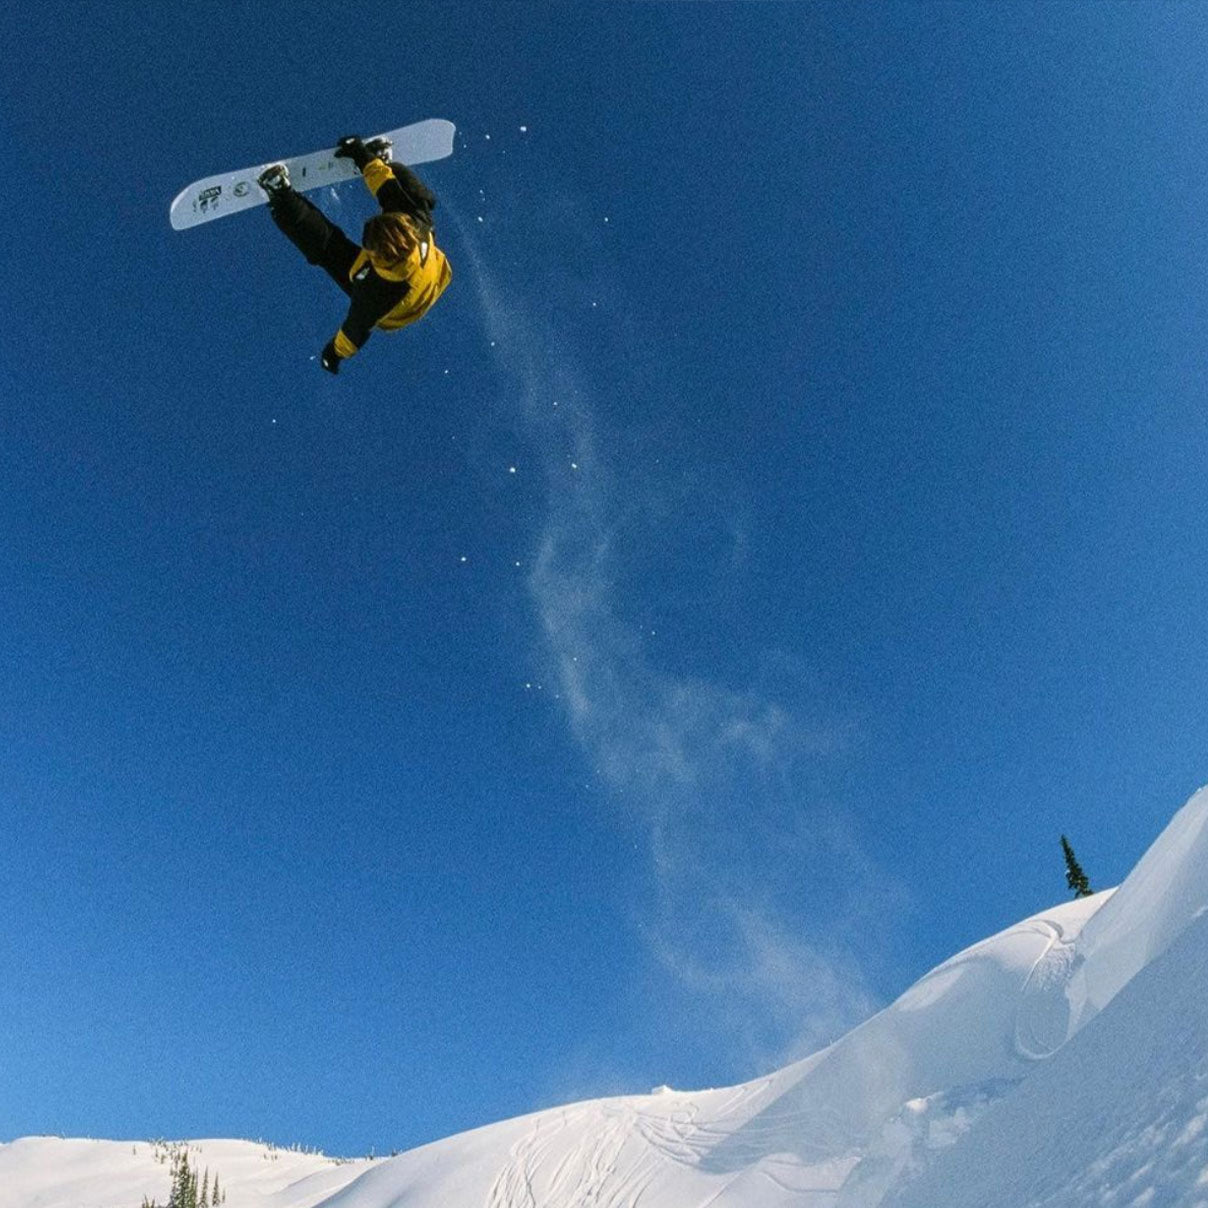 Blake Paul flipping high up in the air on his snowboard